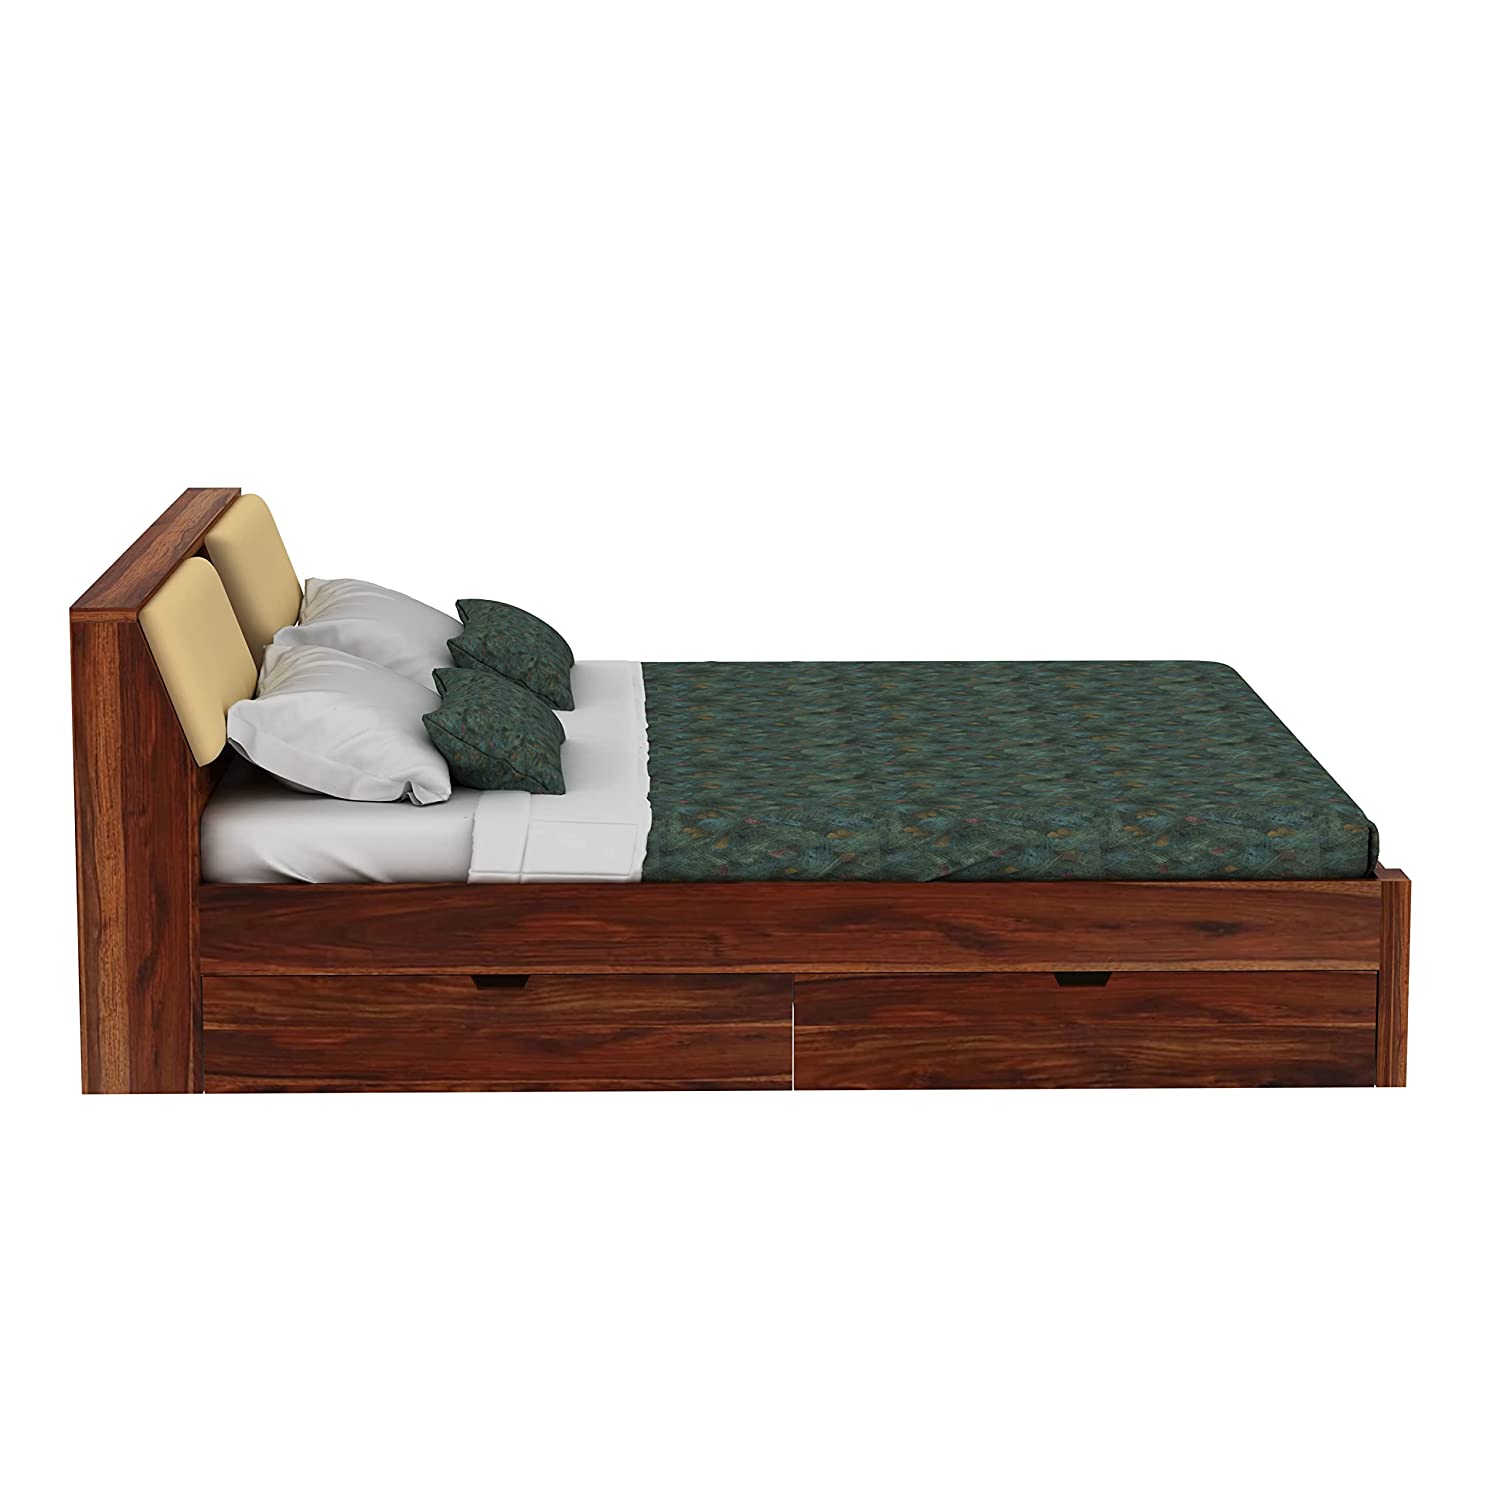 Rubikk Solid Sheesham Wood Bed With Four Drawers (King Size, Natural Finish)